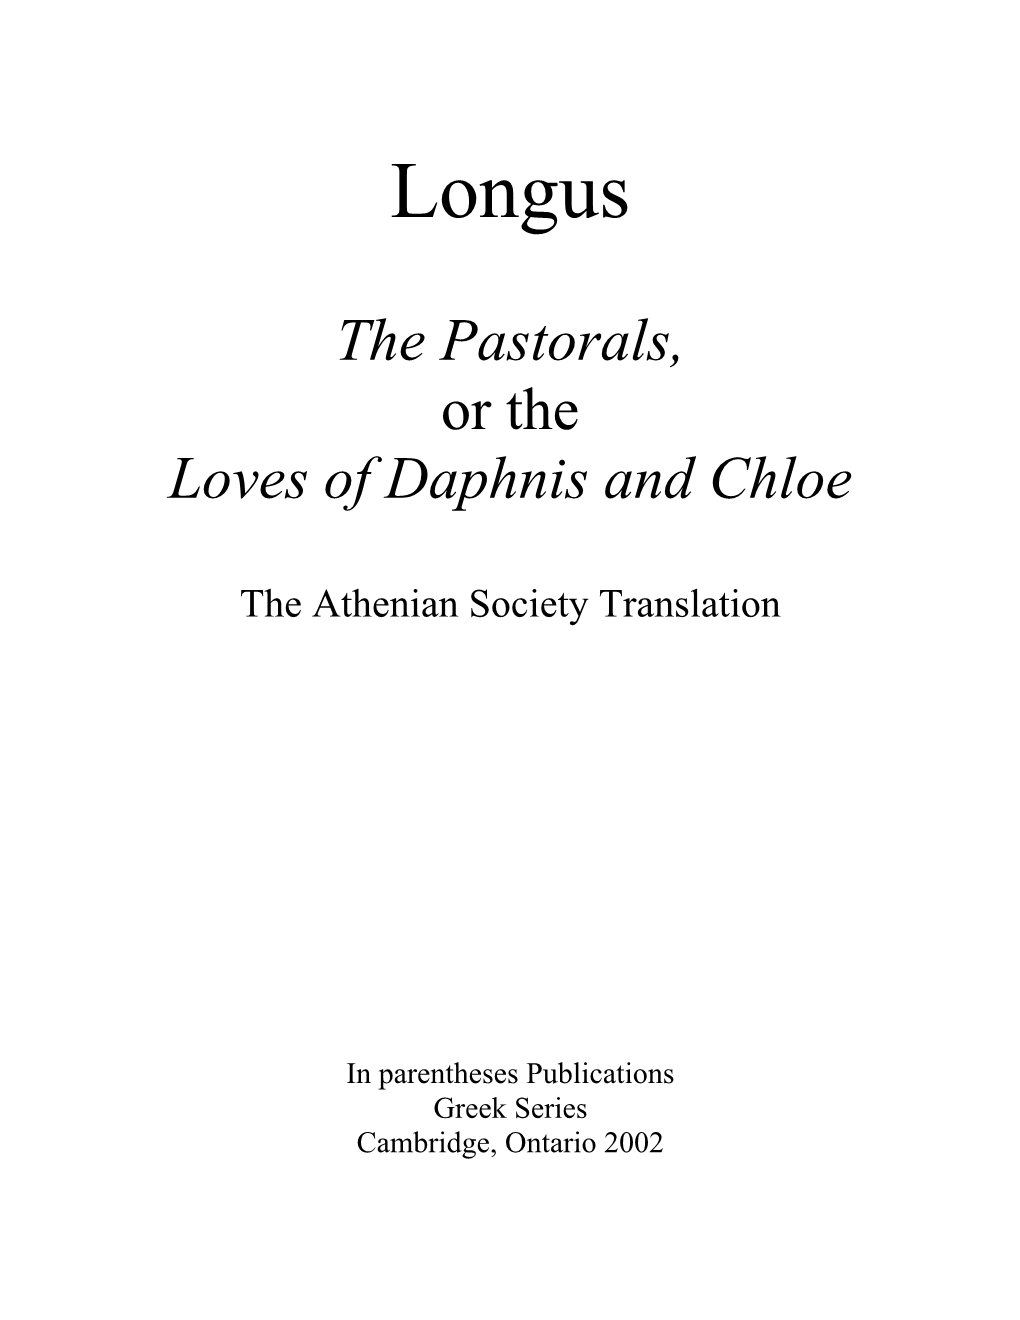 The Pastorals, Or the Loves of Daphnis and Chloe